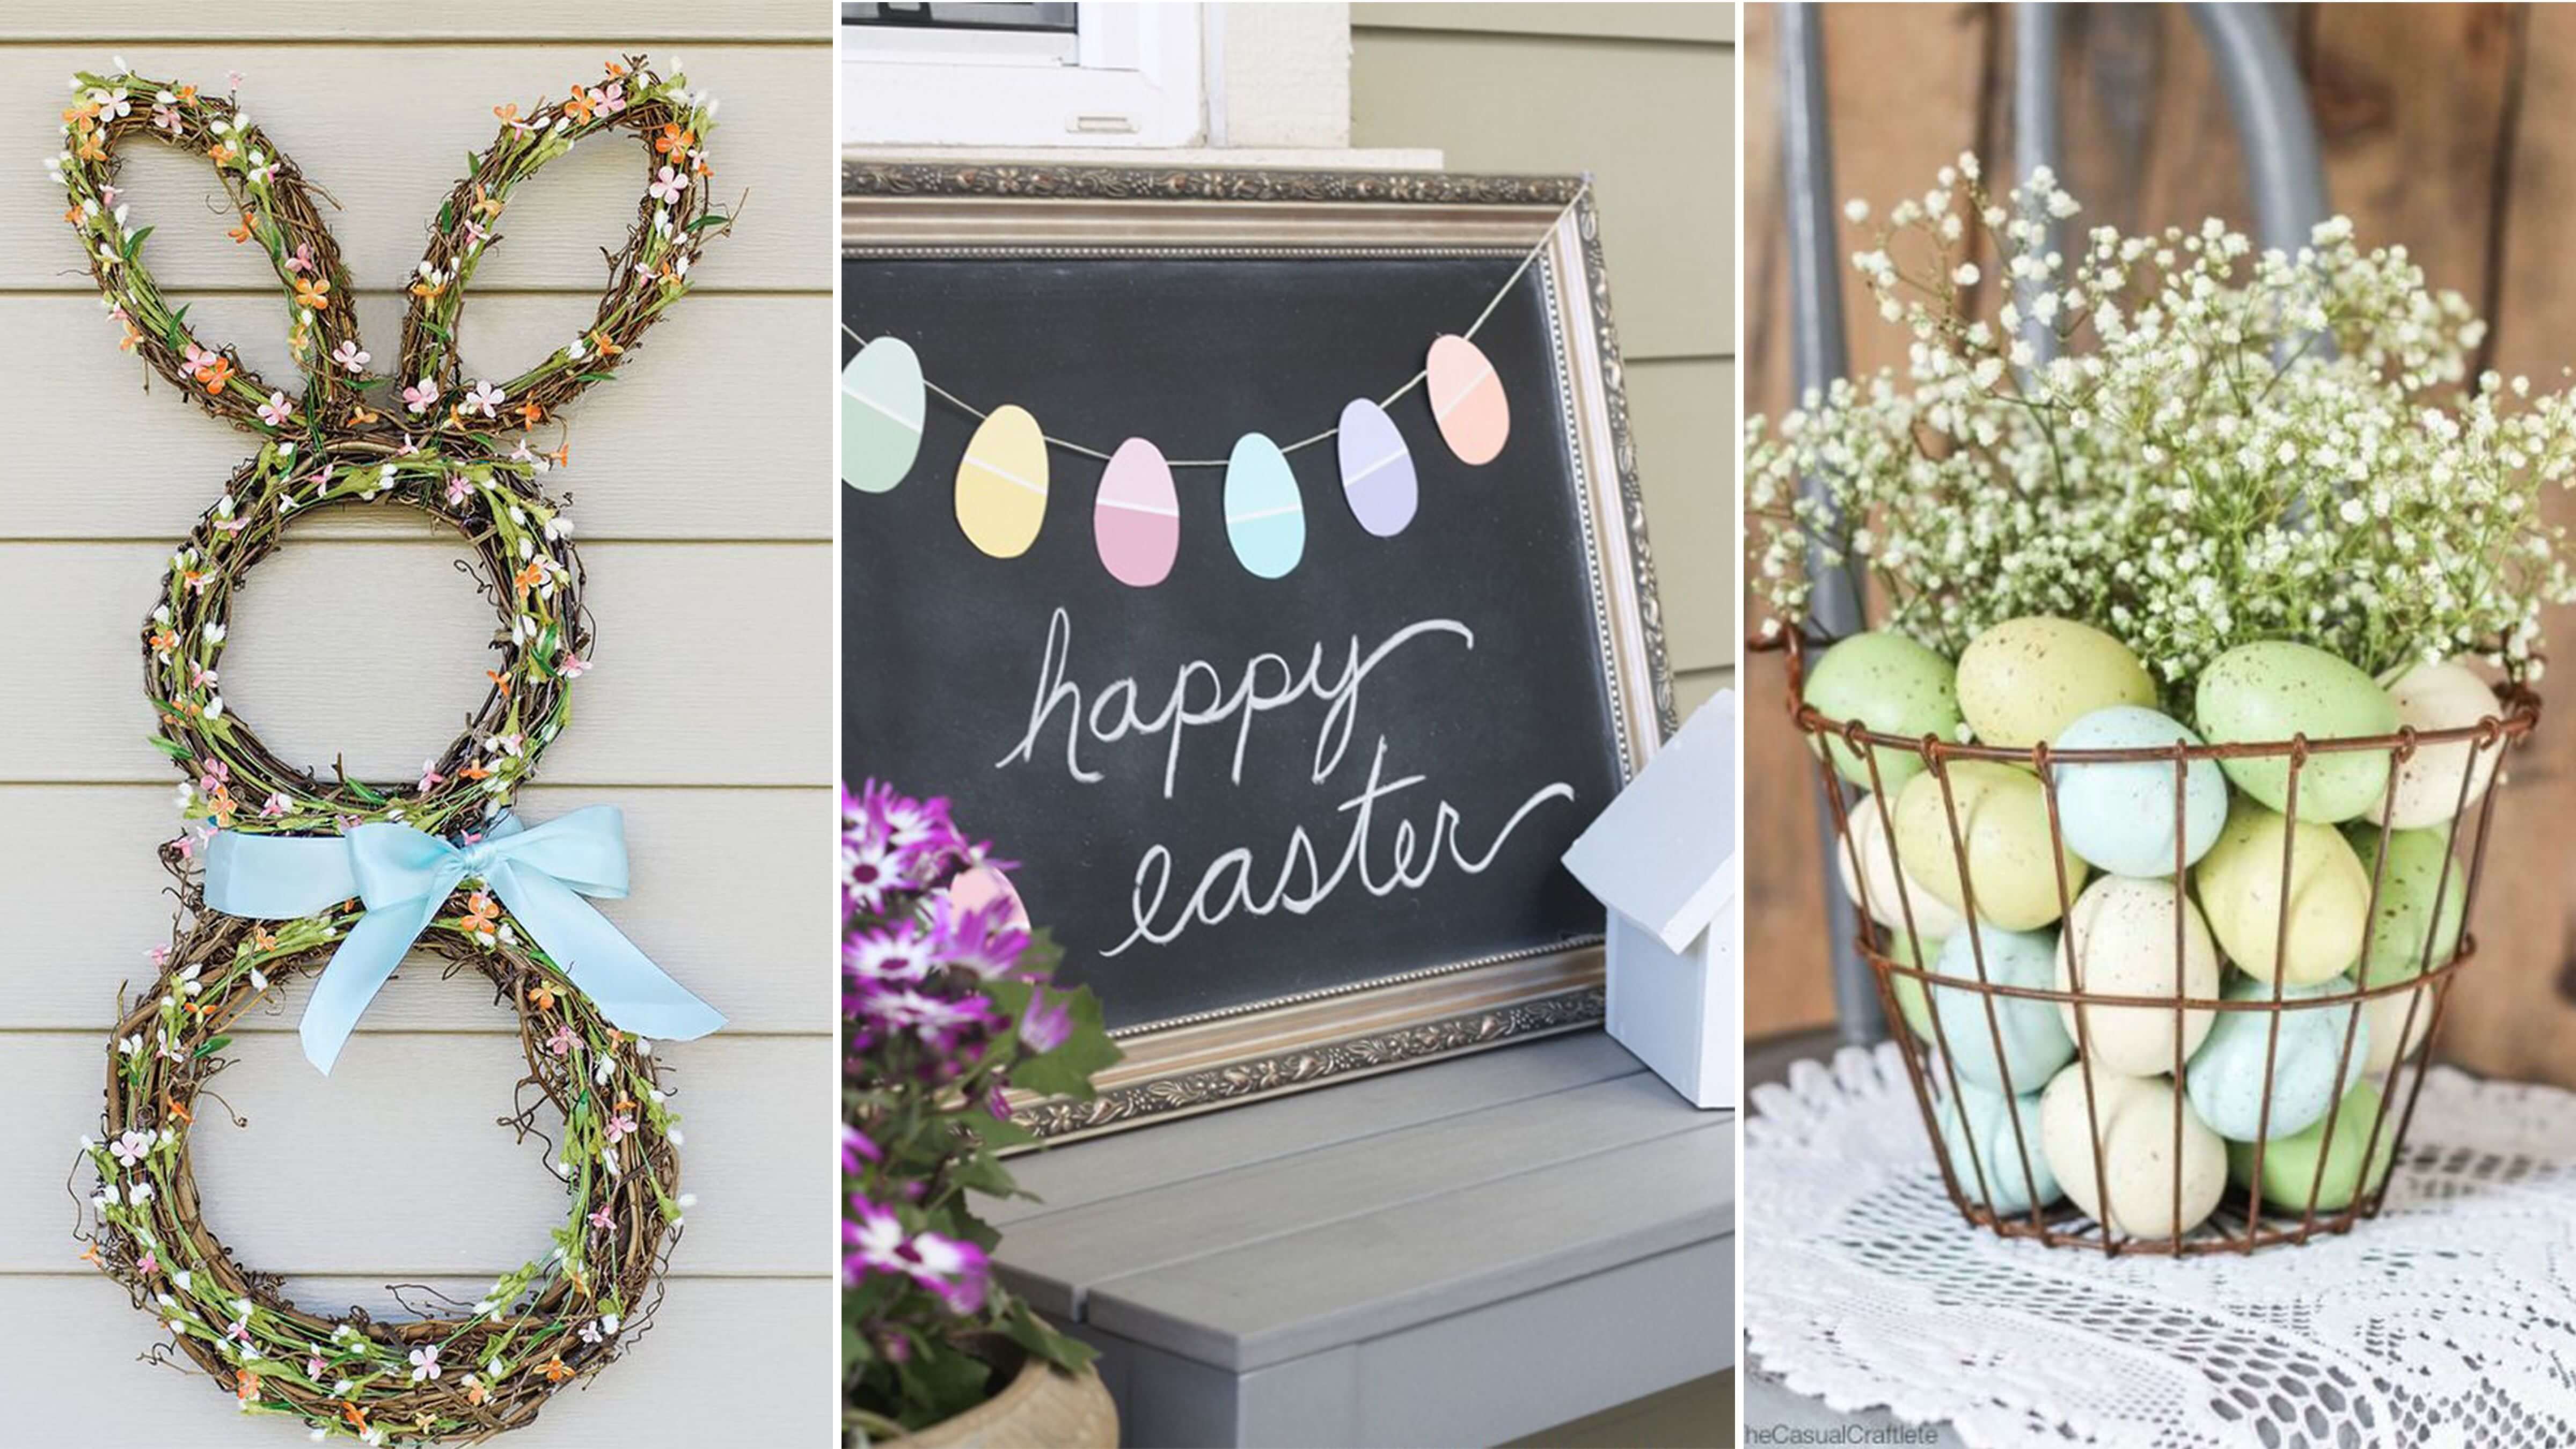 DIY Easter Decorations Make The Festival Blooming